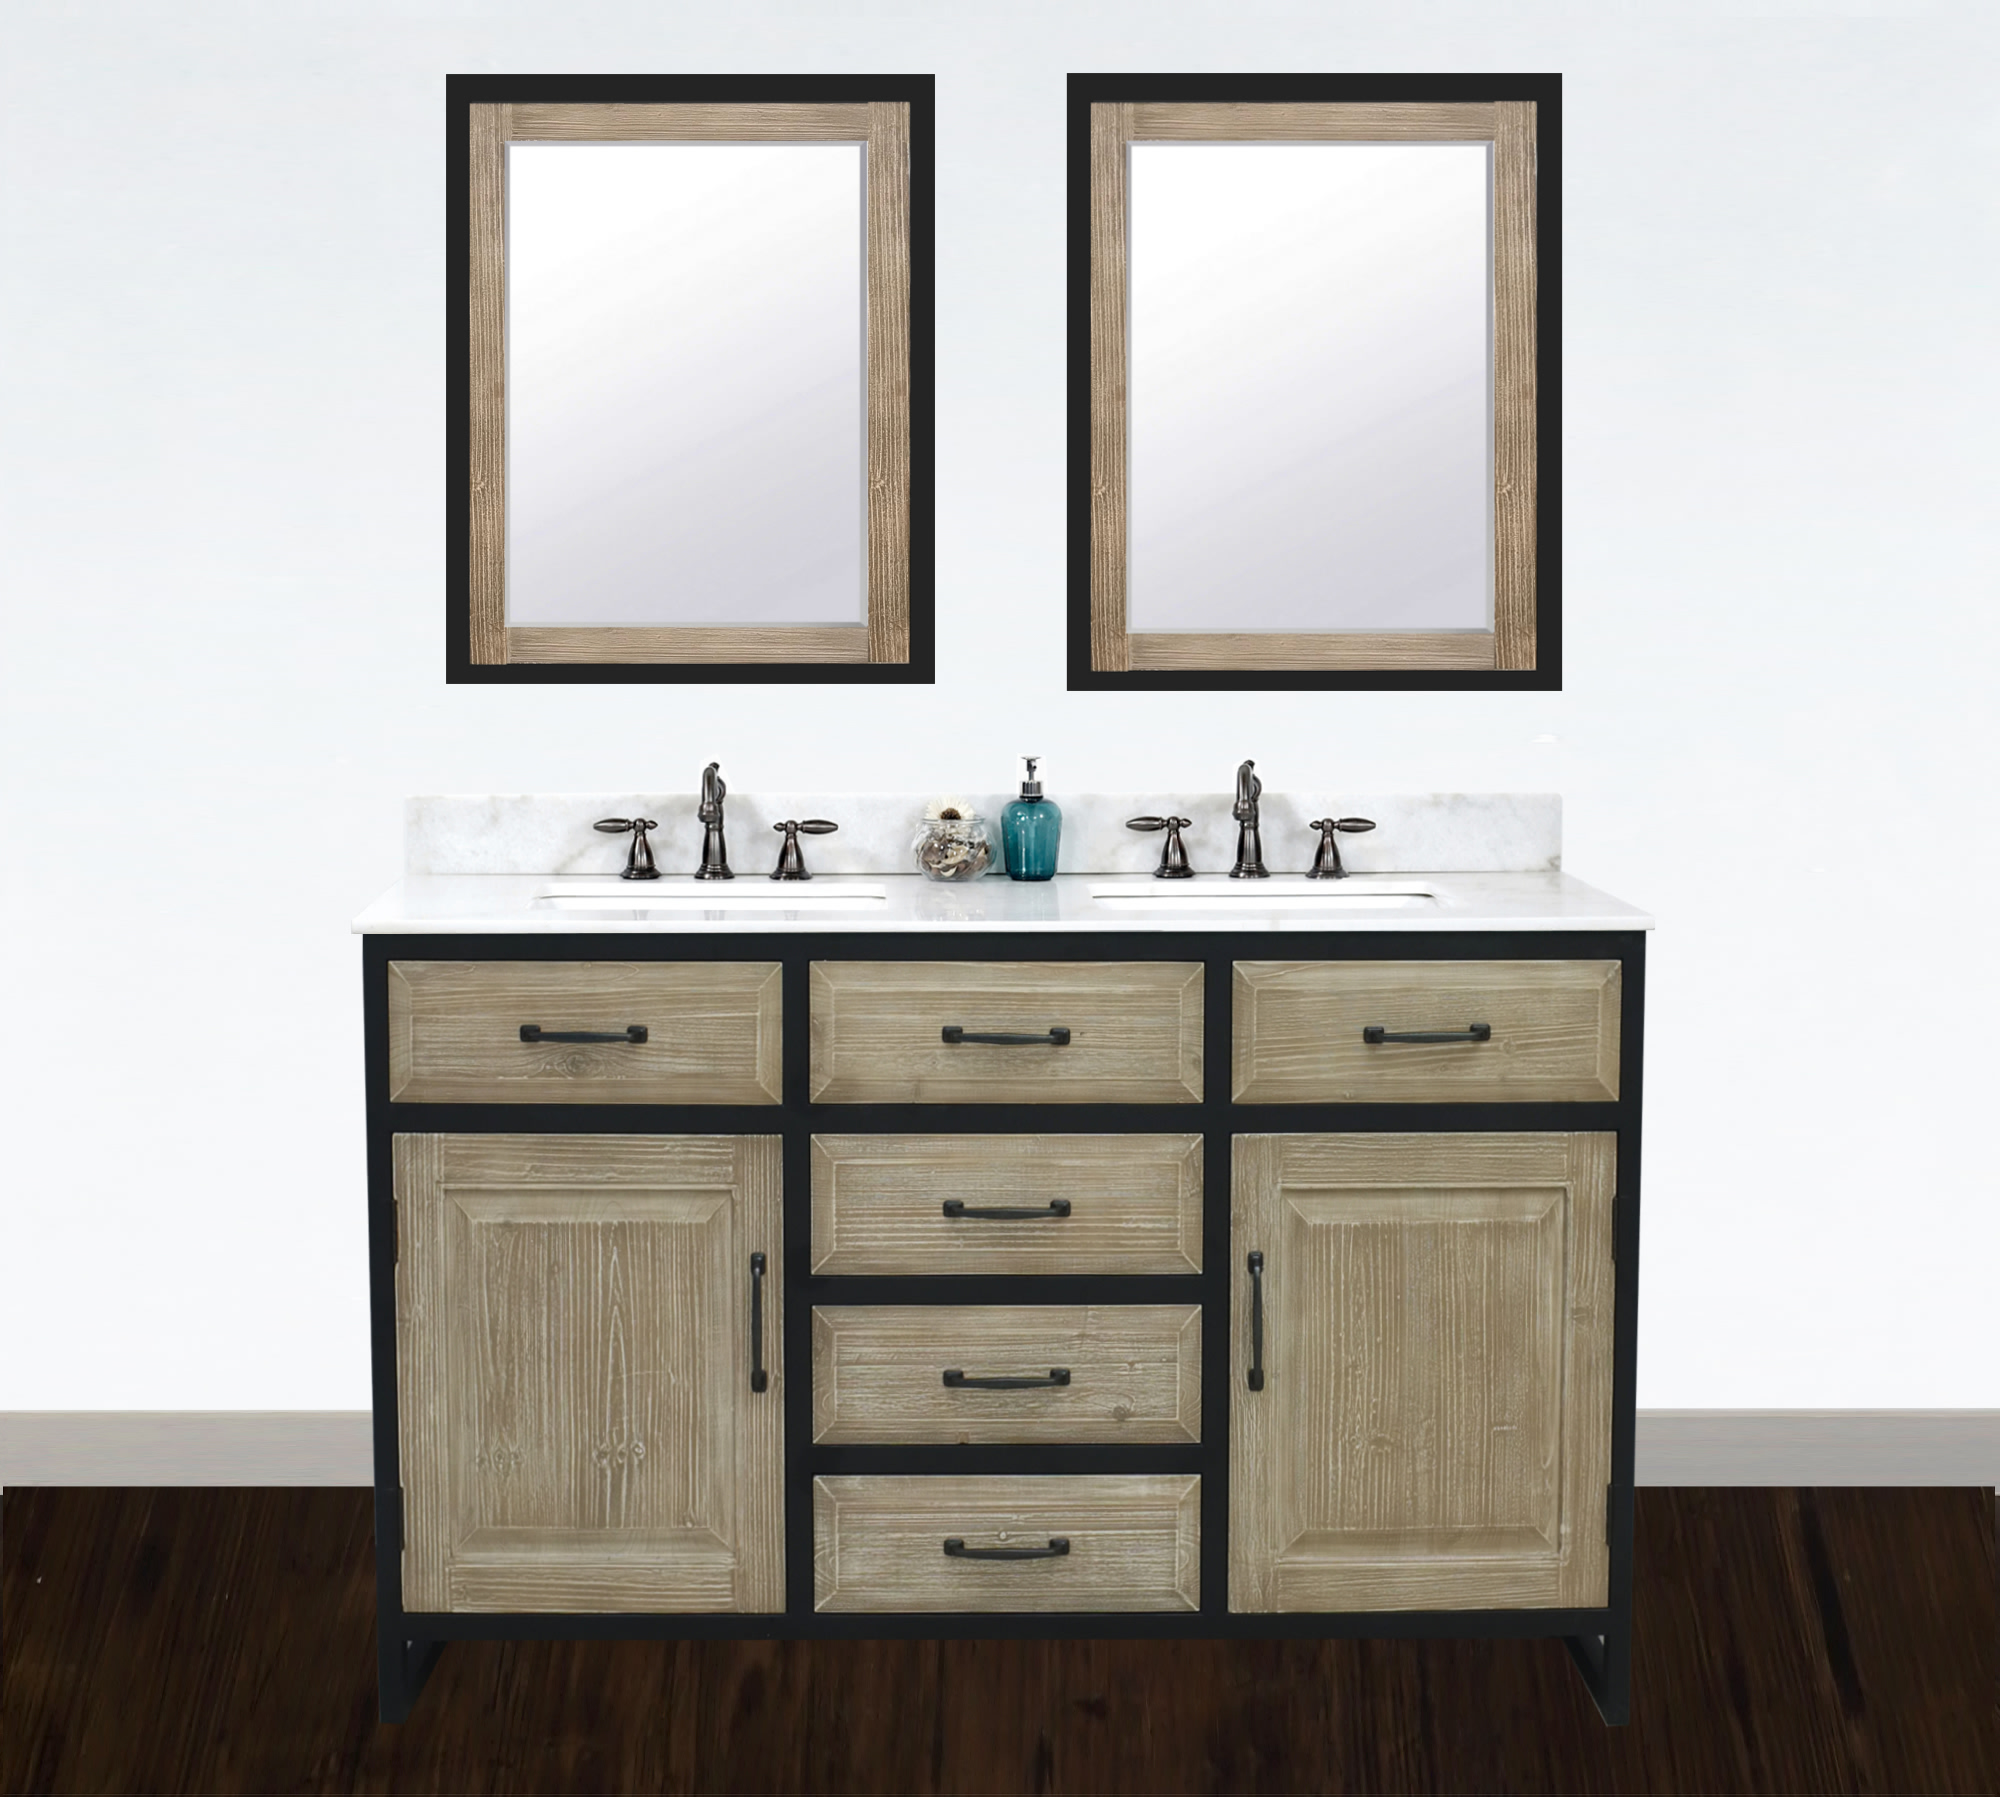 60" Rustic Solid Fir Double Sink with Iron Frame Vanity - No Faucet with Countertop Options